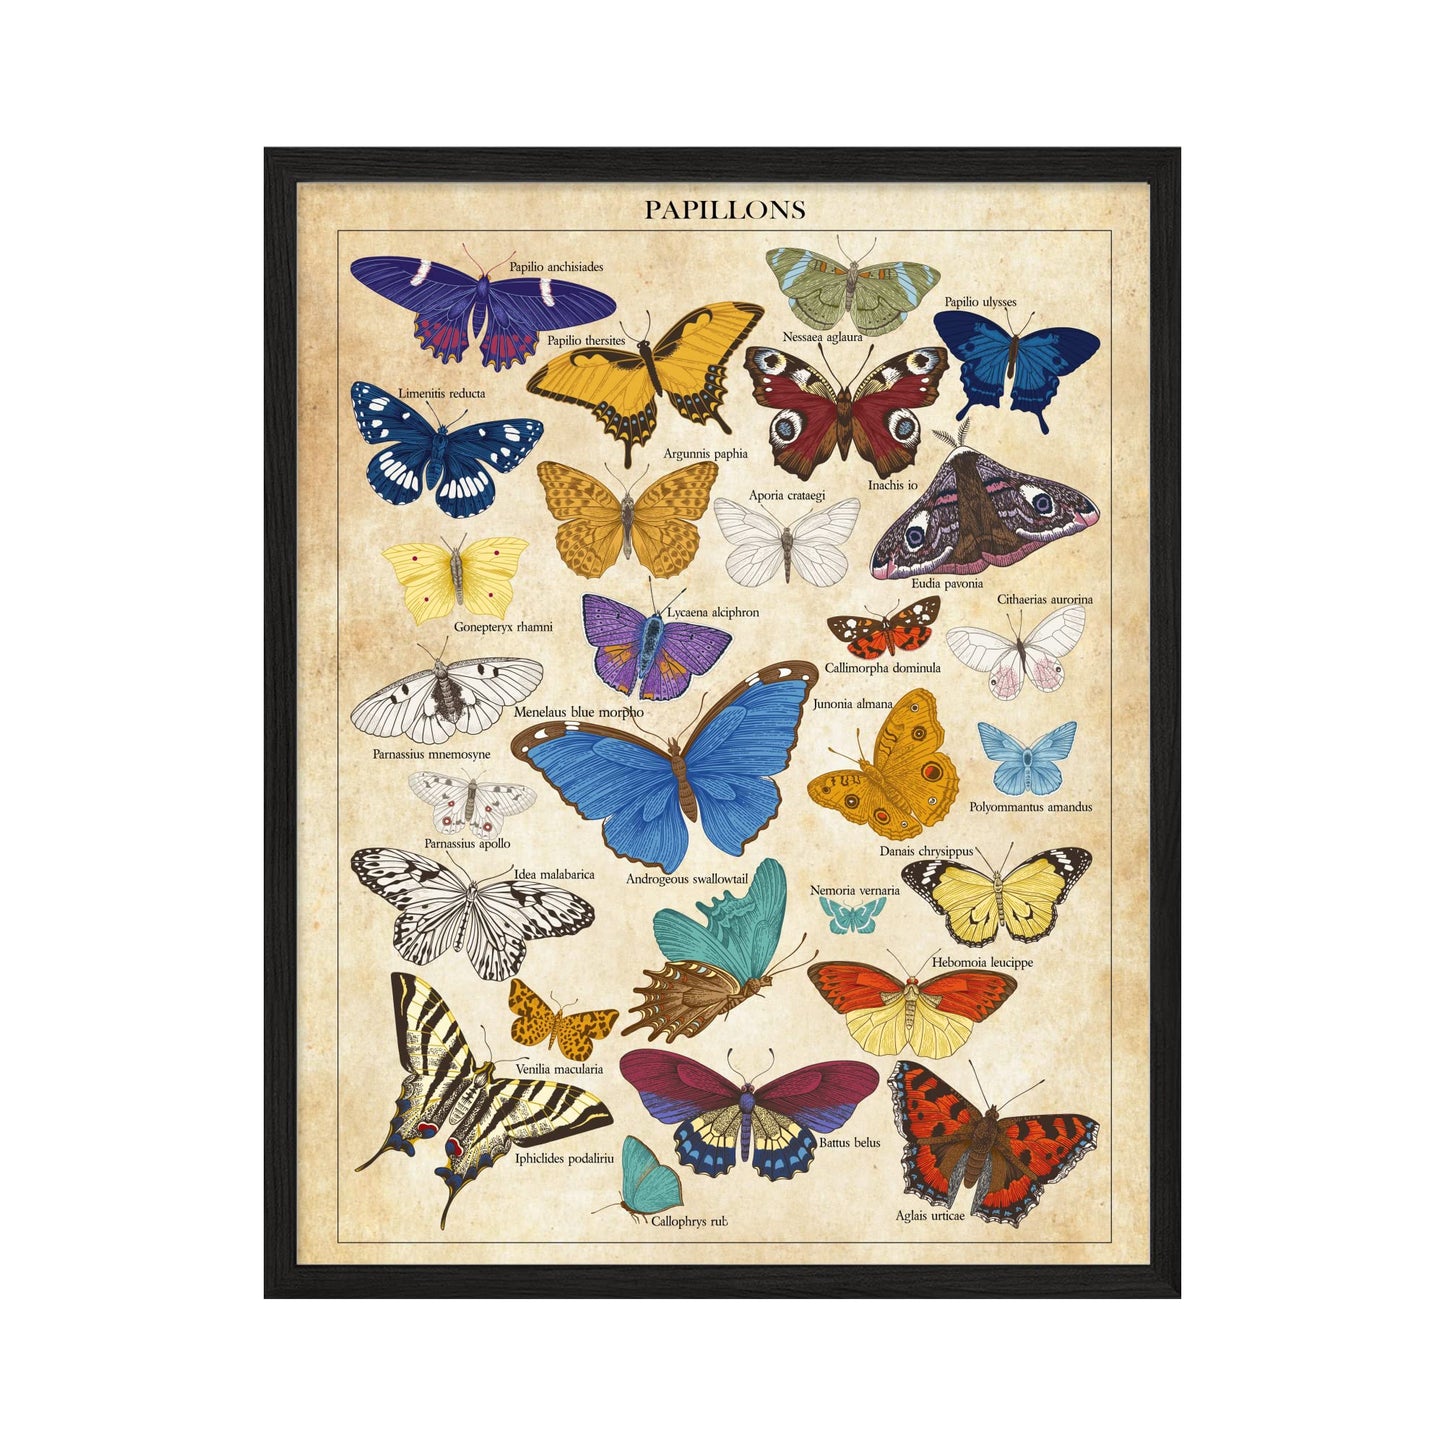 Insire Vintage Butterfly Poster - Aesthetic Butterfly Prints Wall Art, Butterfly Room Decor Aesthetic, Vintage Butterfly Wall Art, Butterfly Art Wall Decor - Unframed Set of 1 (11x14”)